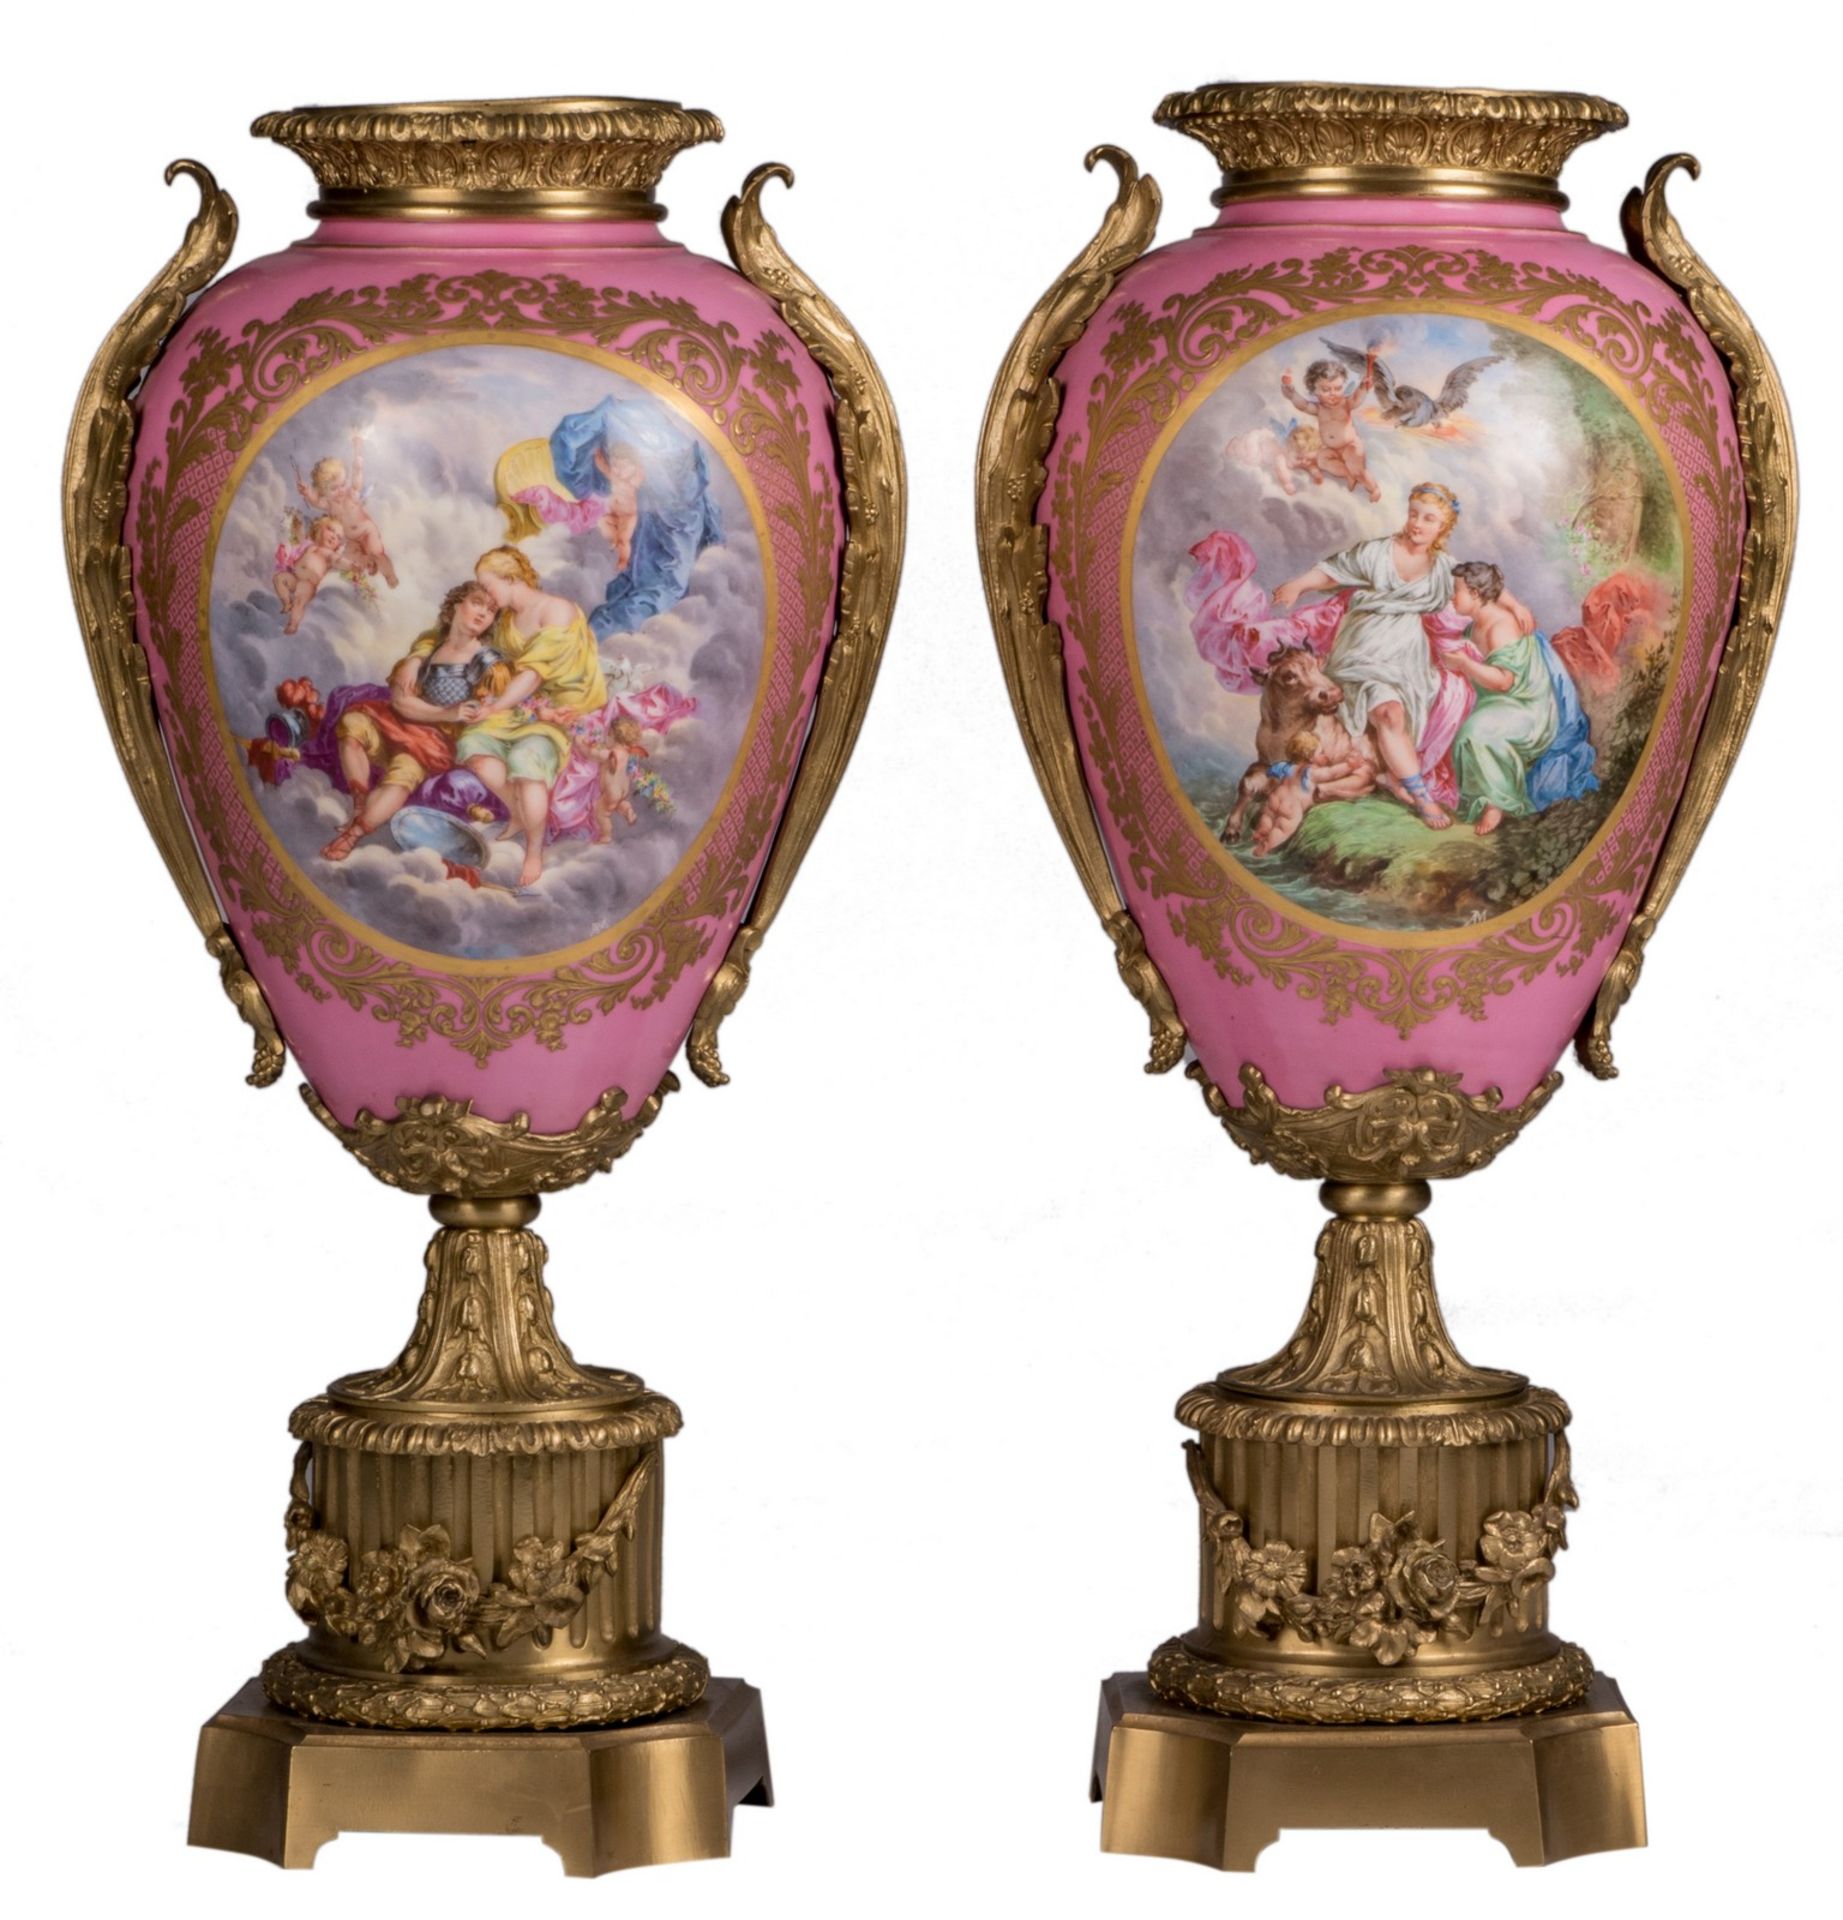 A pair of, probably, Sèvres vases with neoclassical bronze mounts, the decoration with "Rose